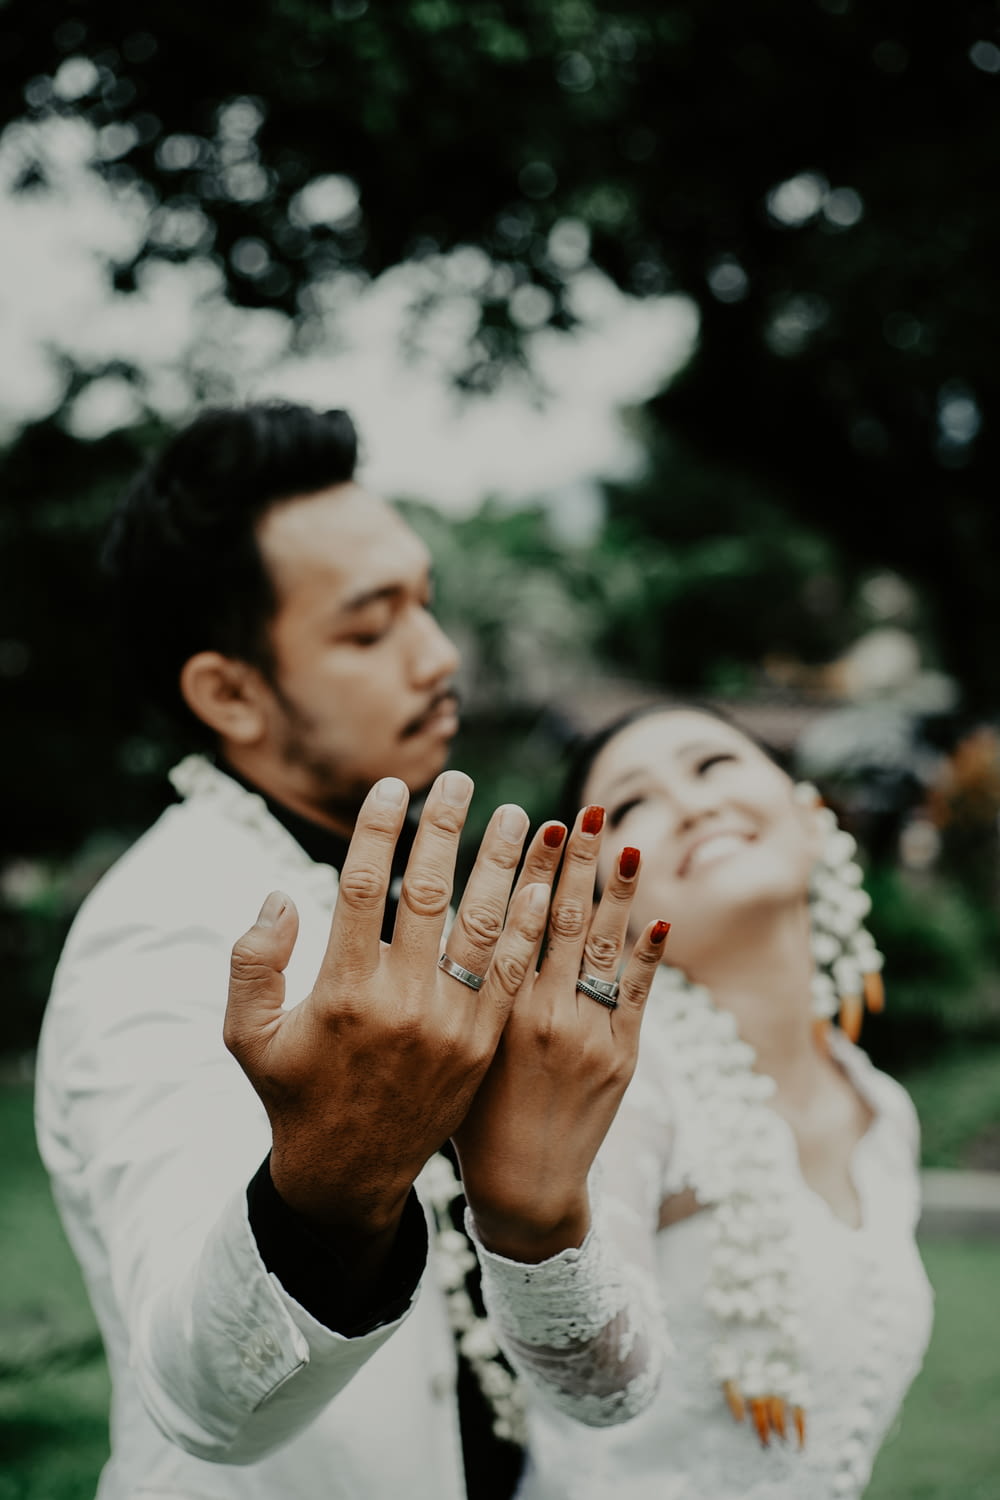 newlywed couples showing wedding bands on ring fingers